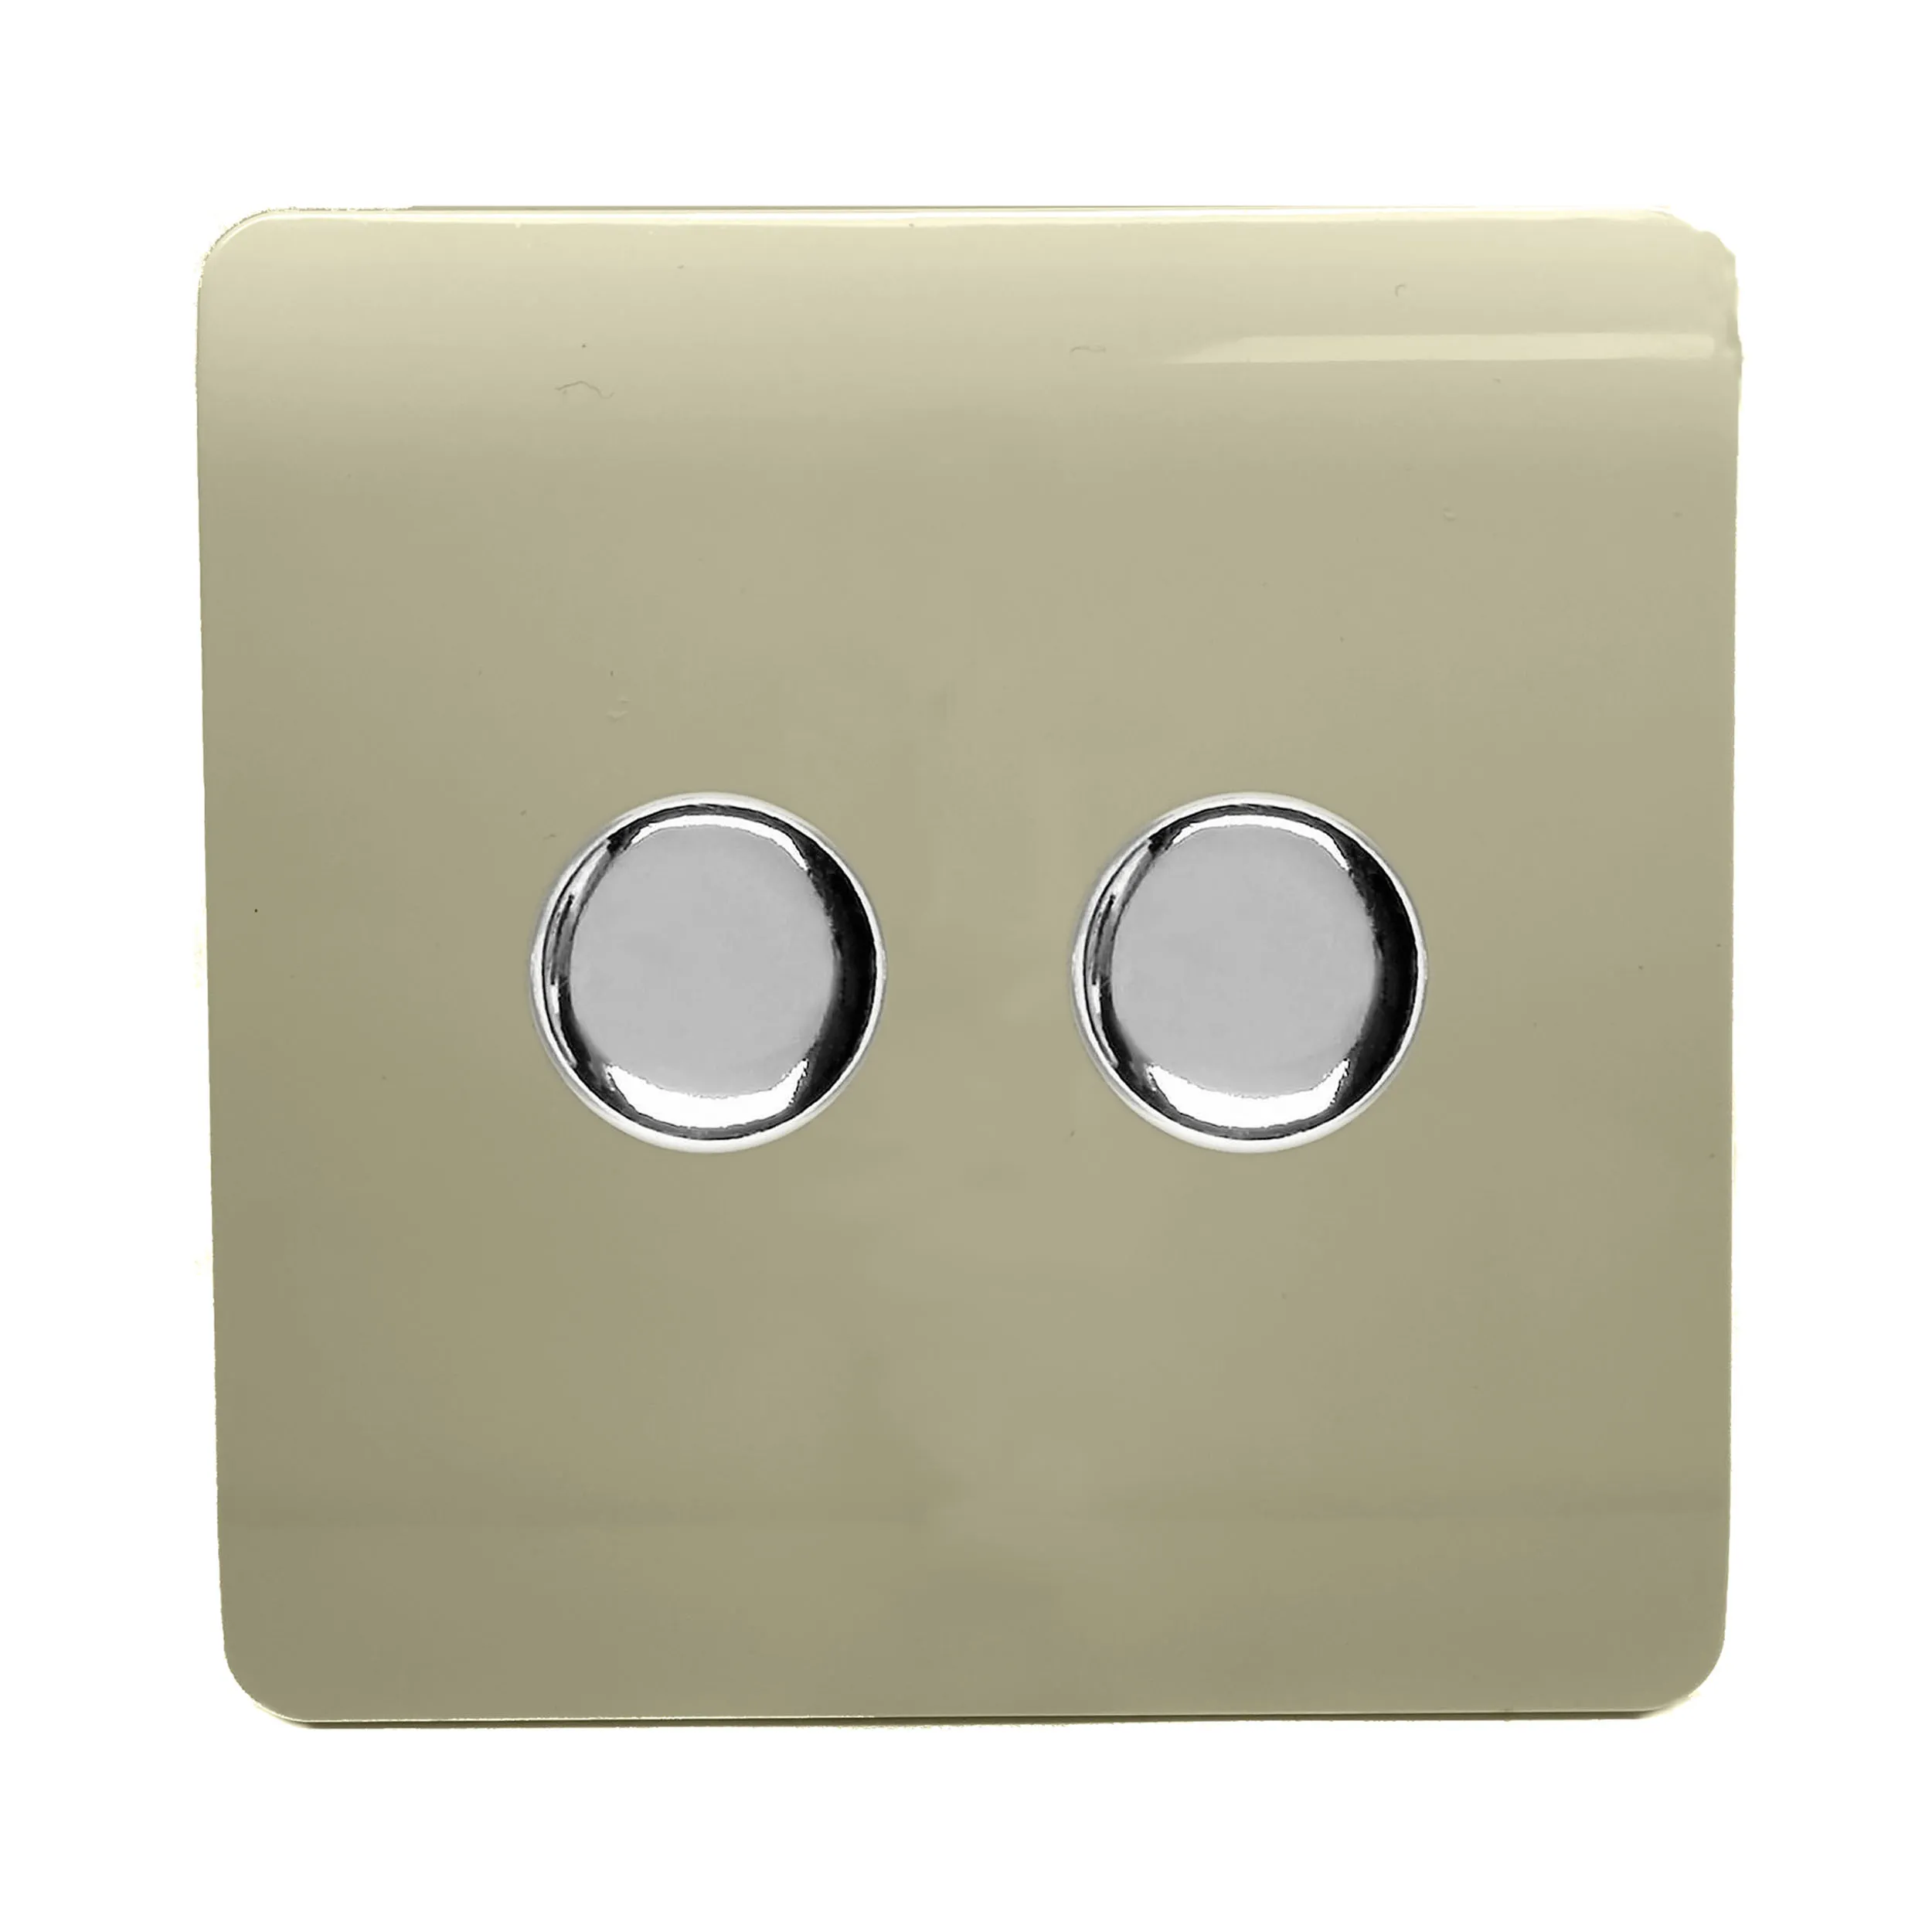 ART-2LDMGO  2 Gang 2 Way LED Dimmer Switch Champagne Gold